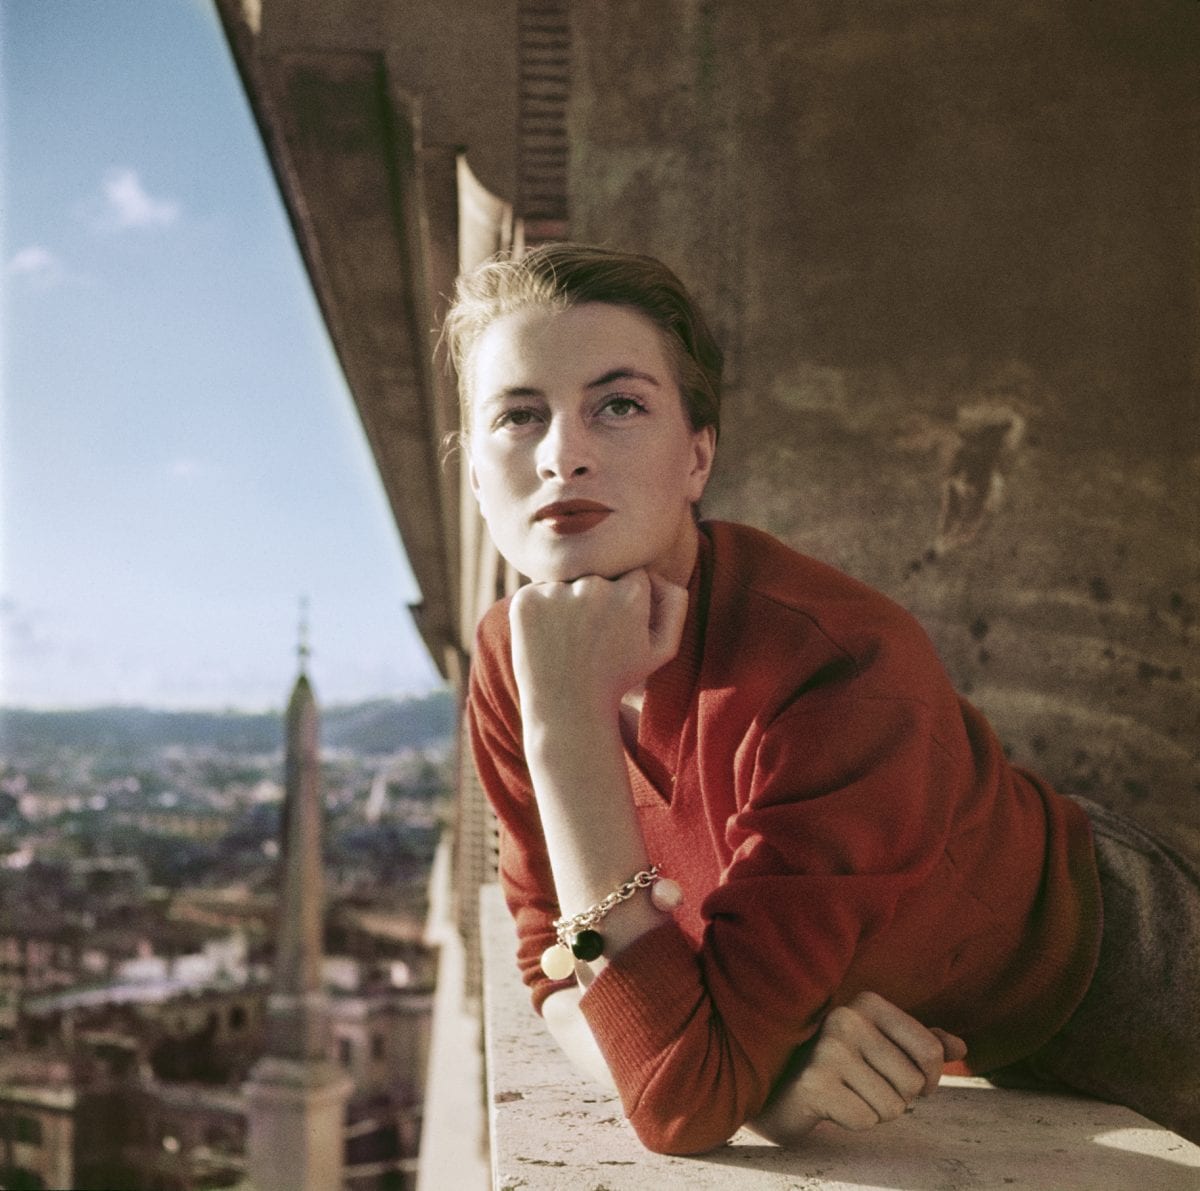 Capucine, French model and actress, on a balcony, Rome, August 1951. ©Robert Capa/International Center of Photography/Magnum Photos.